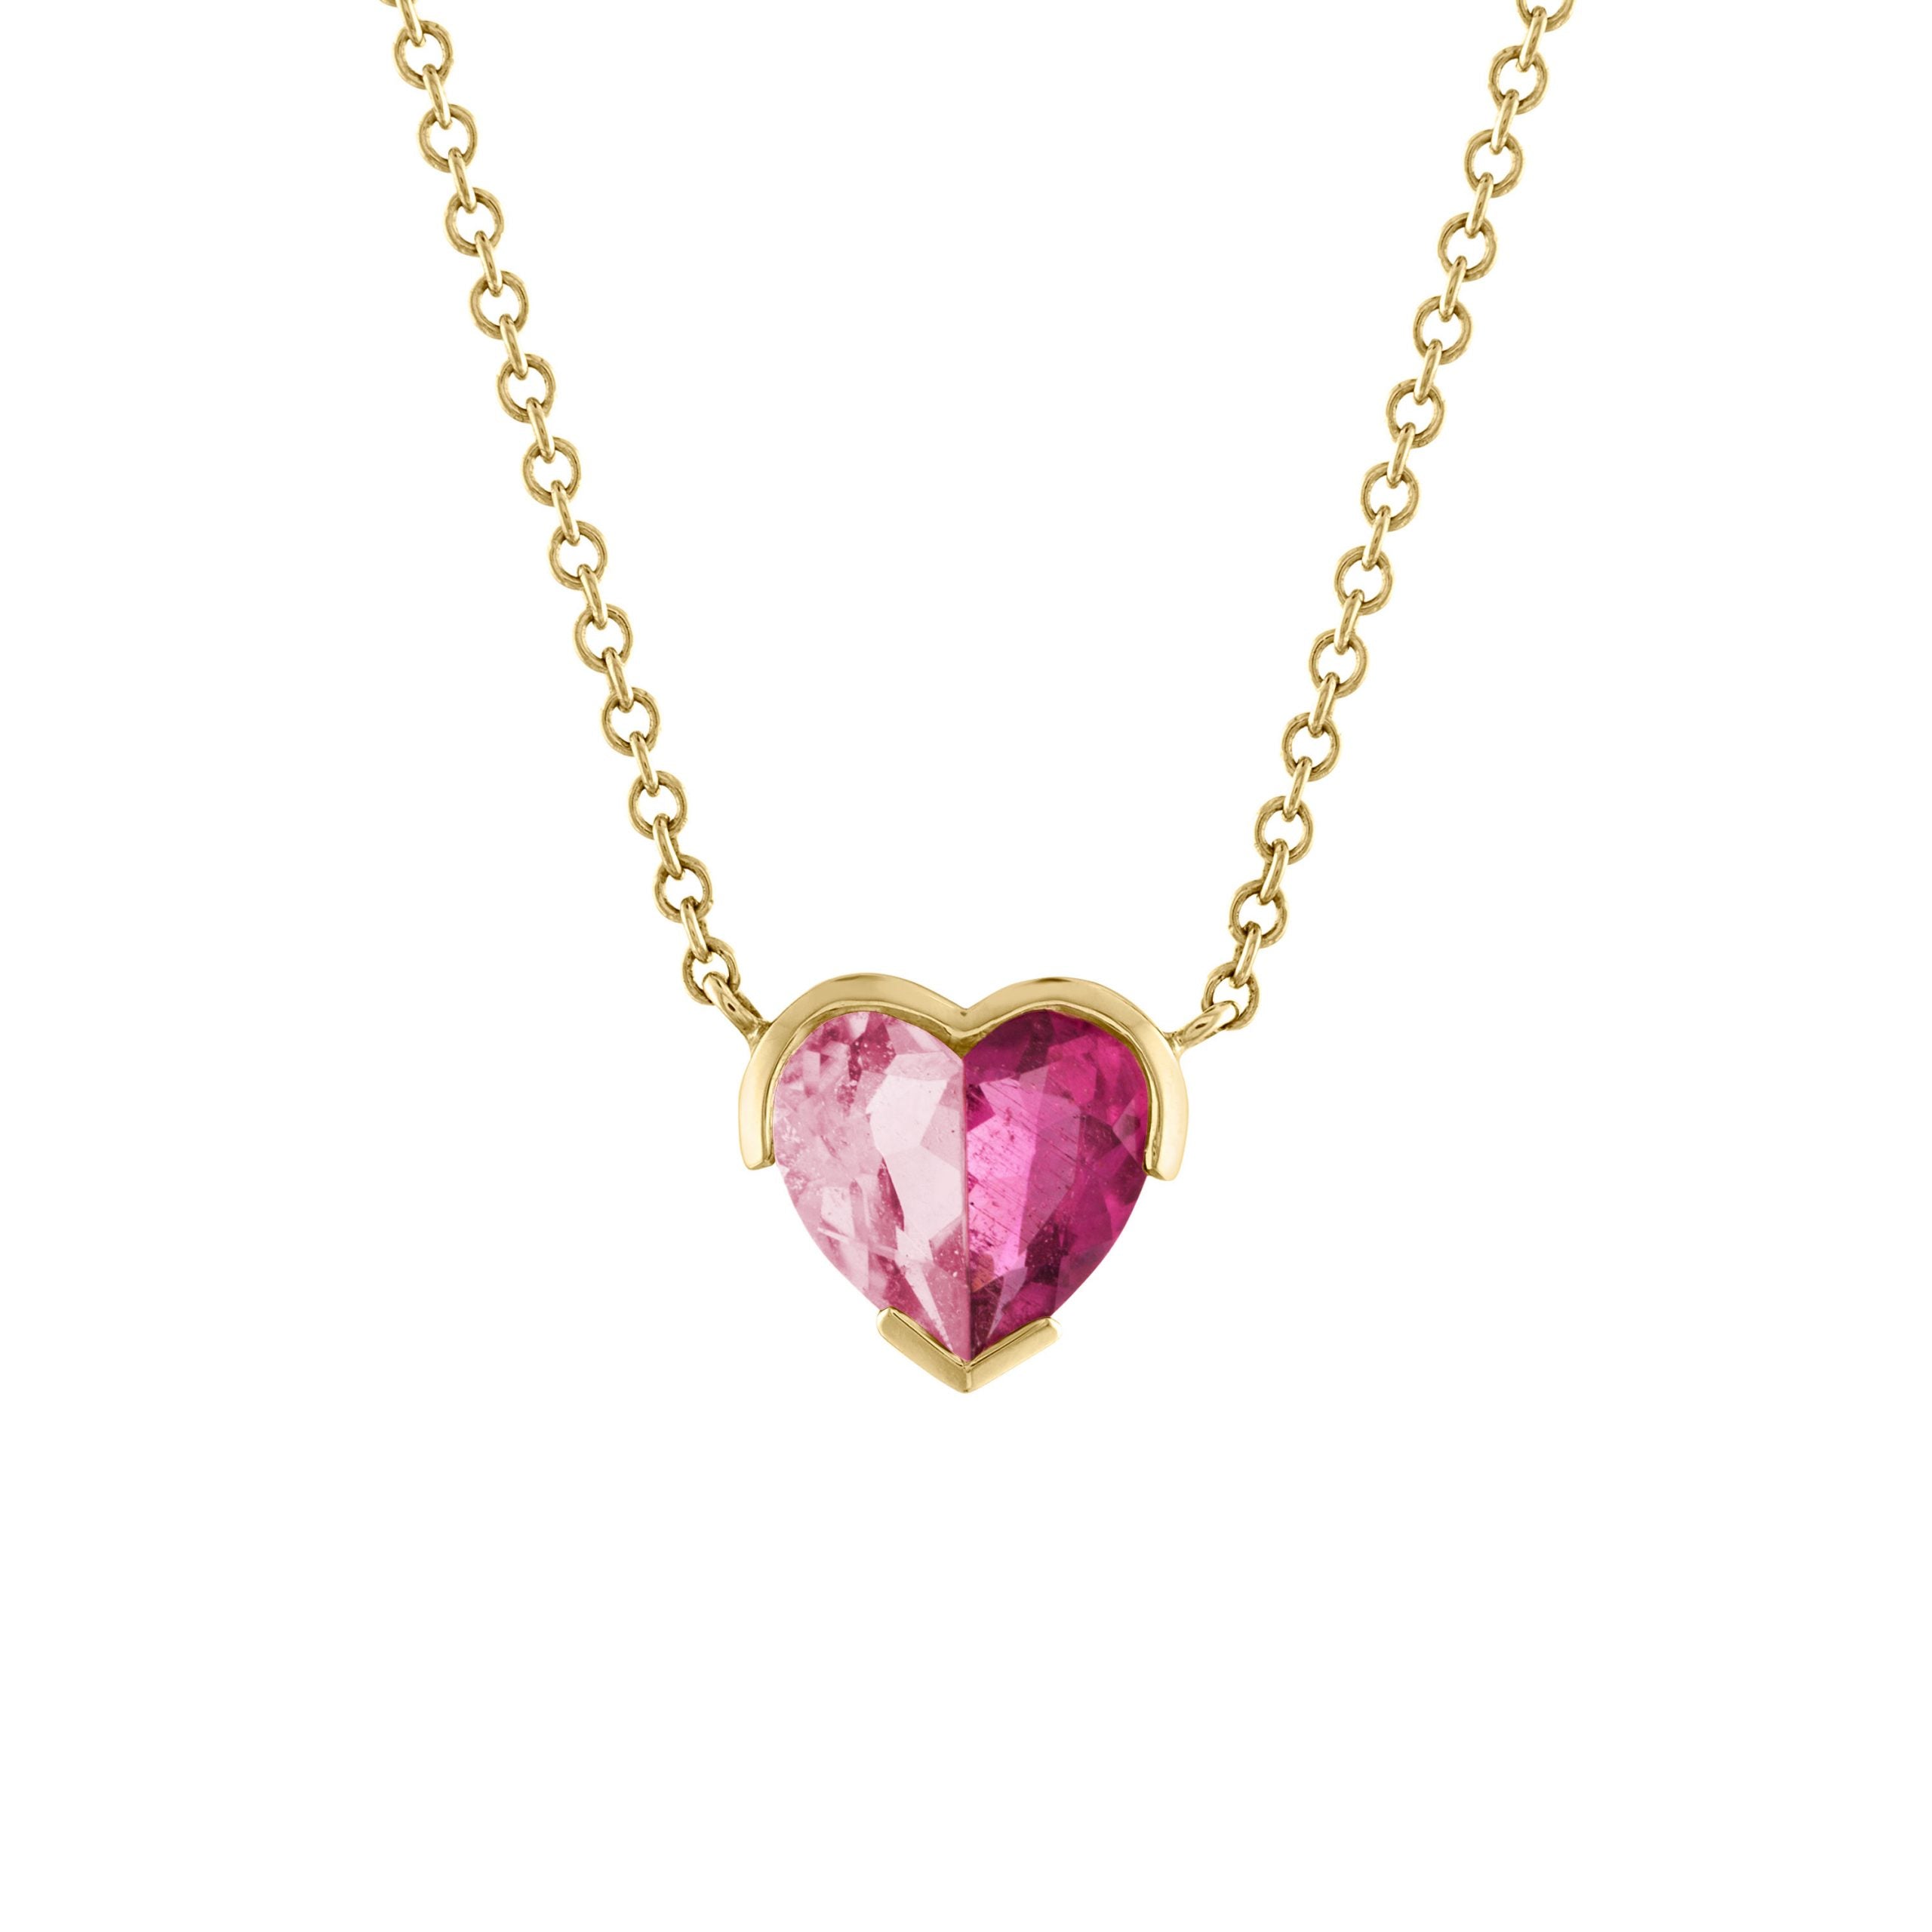 Bicolor Heart necklace with two pink tourmalines set in open bezel